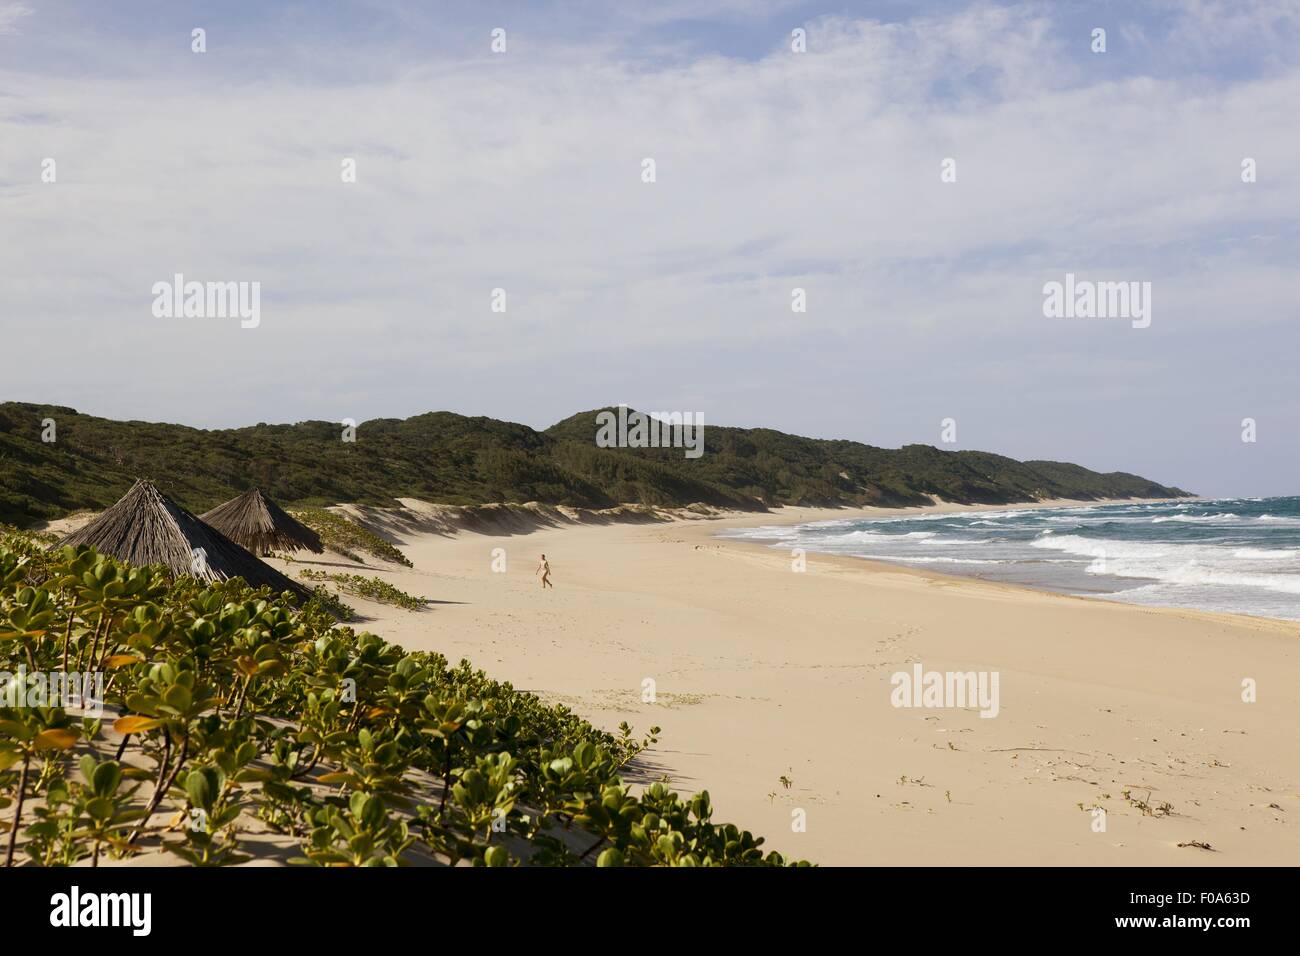 View of Maputaland Marine Reserve on beach at South Africa Stock Photo